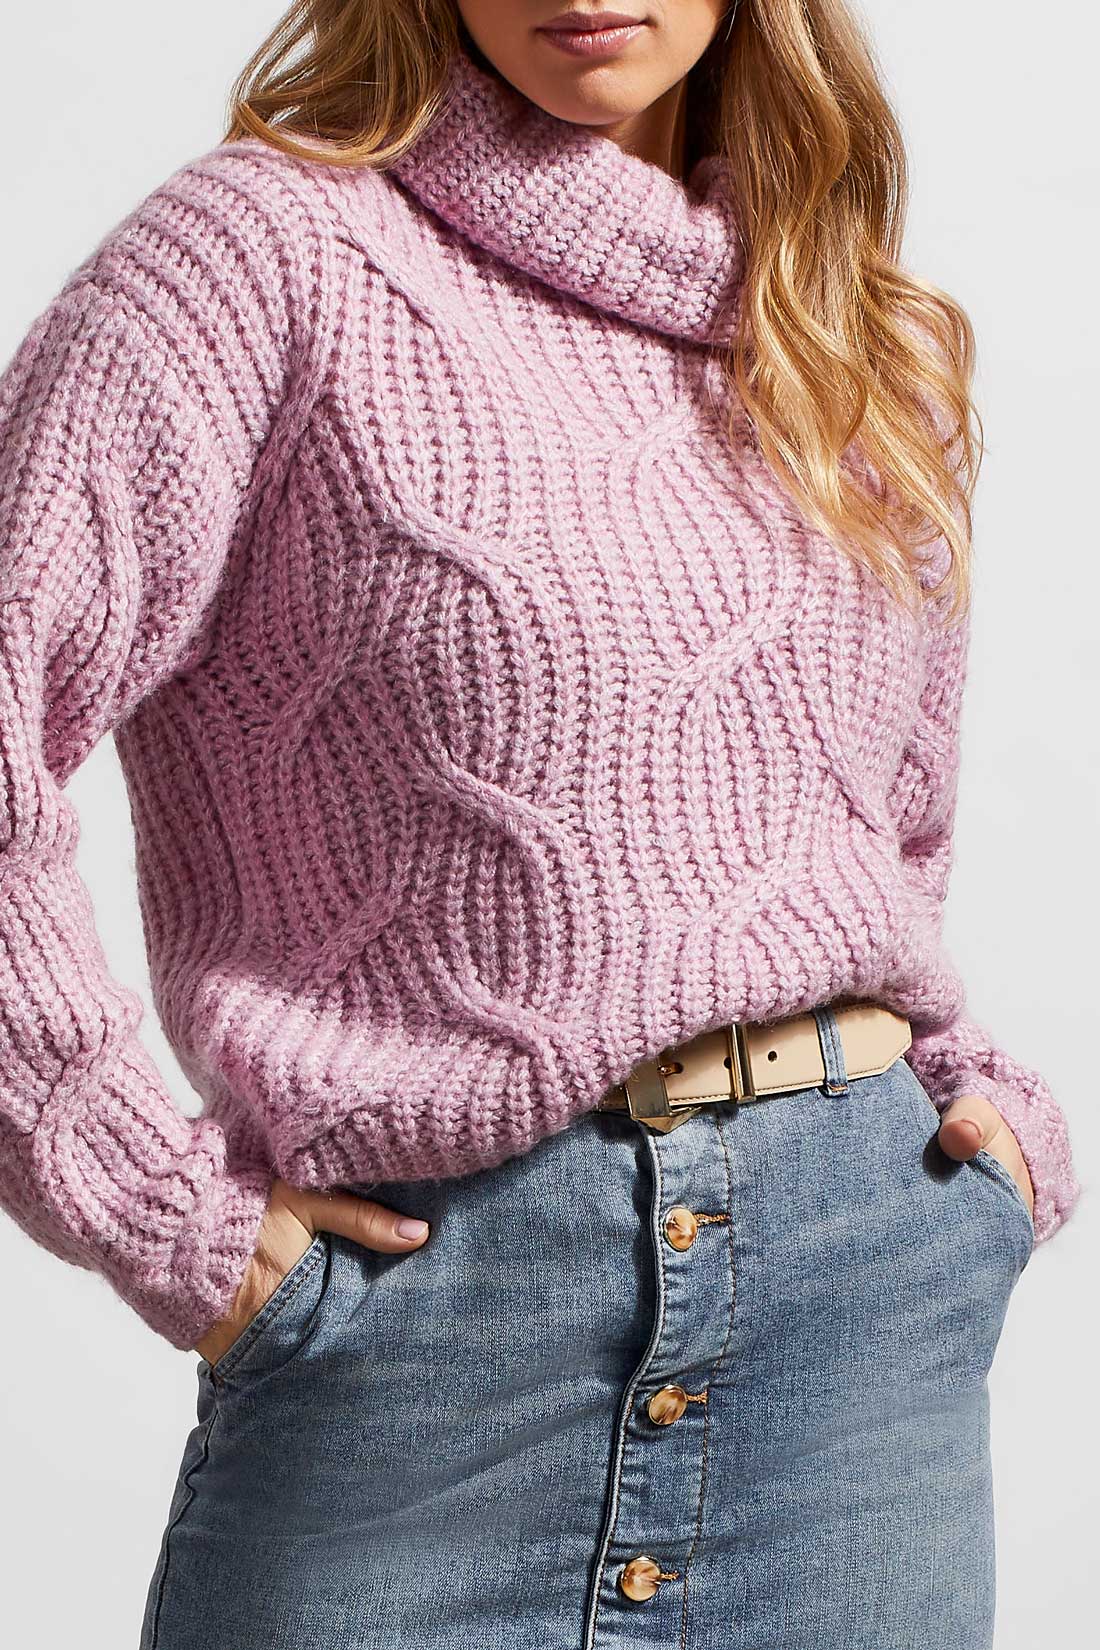 Tribal Turtleneck Sweater With Cable Detail